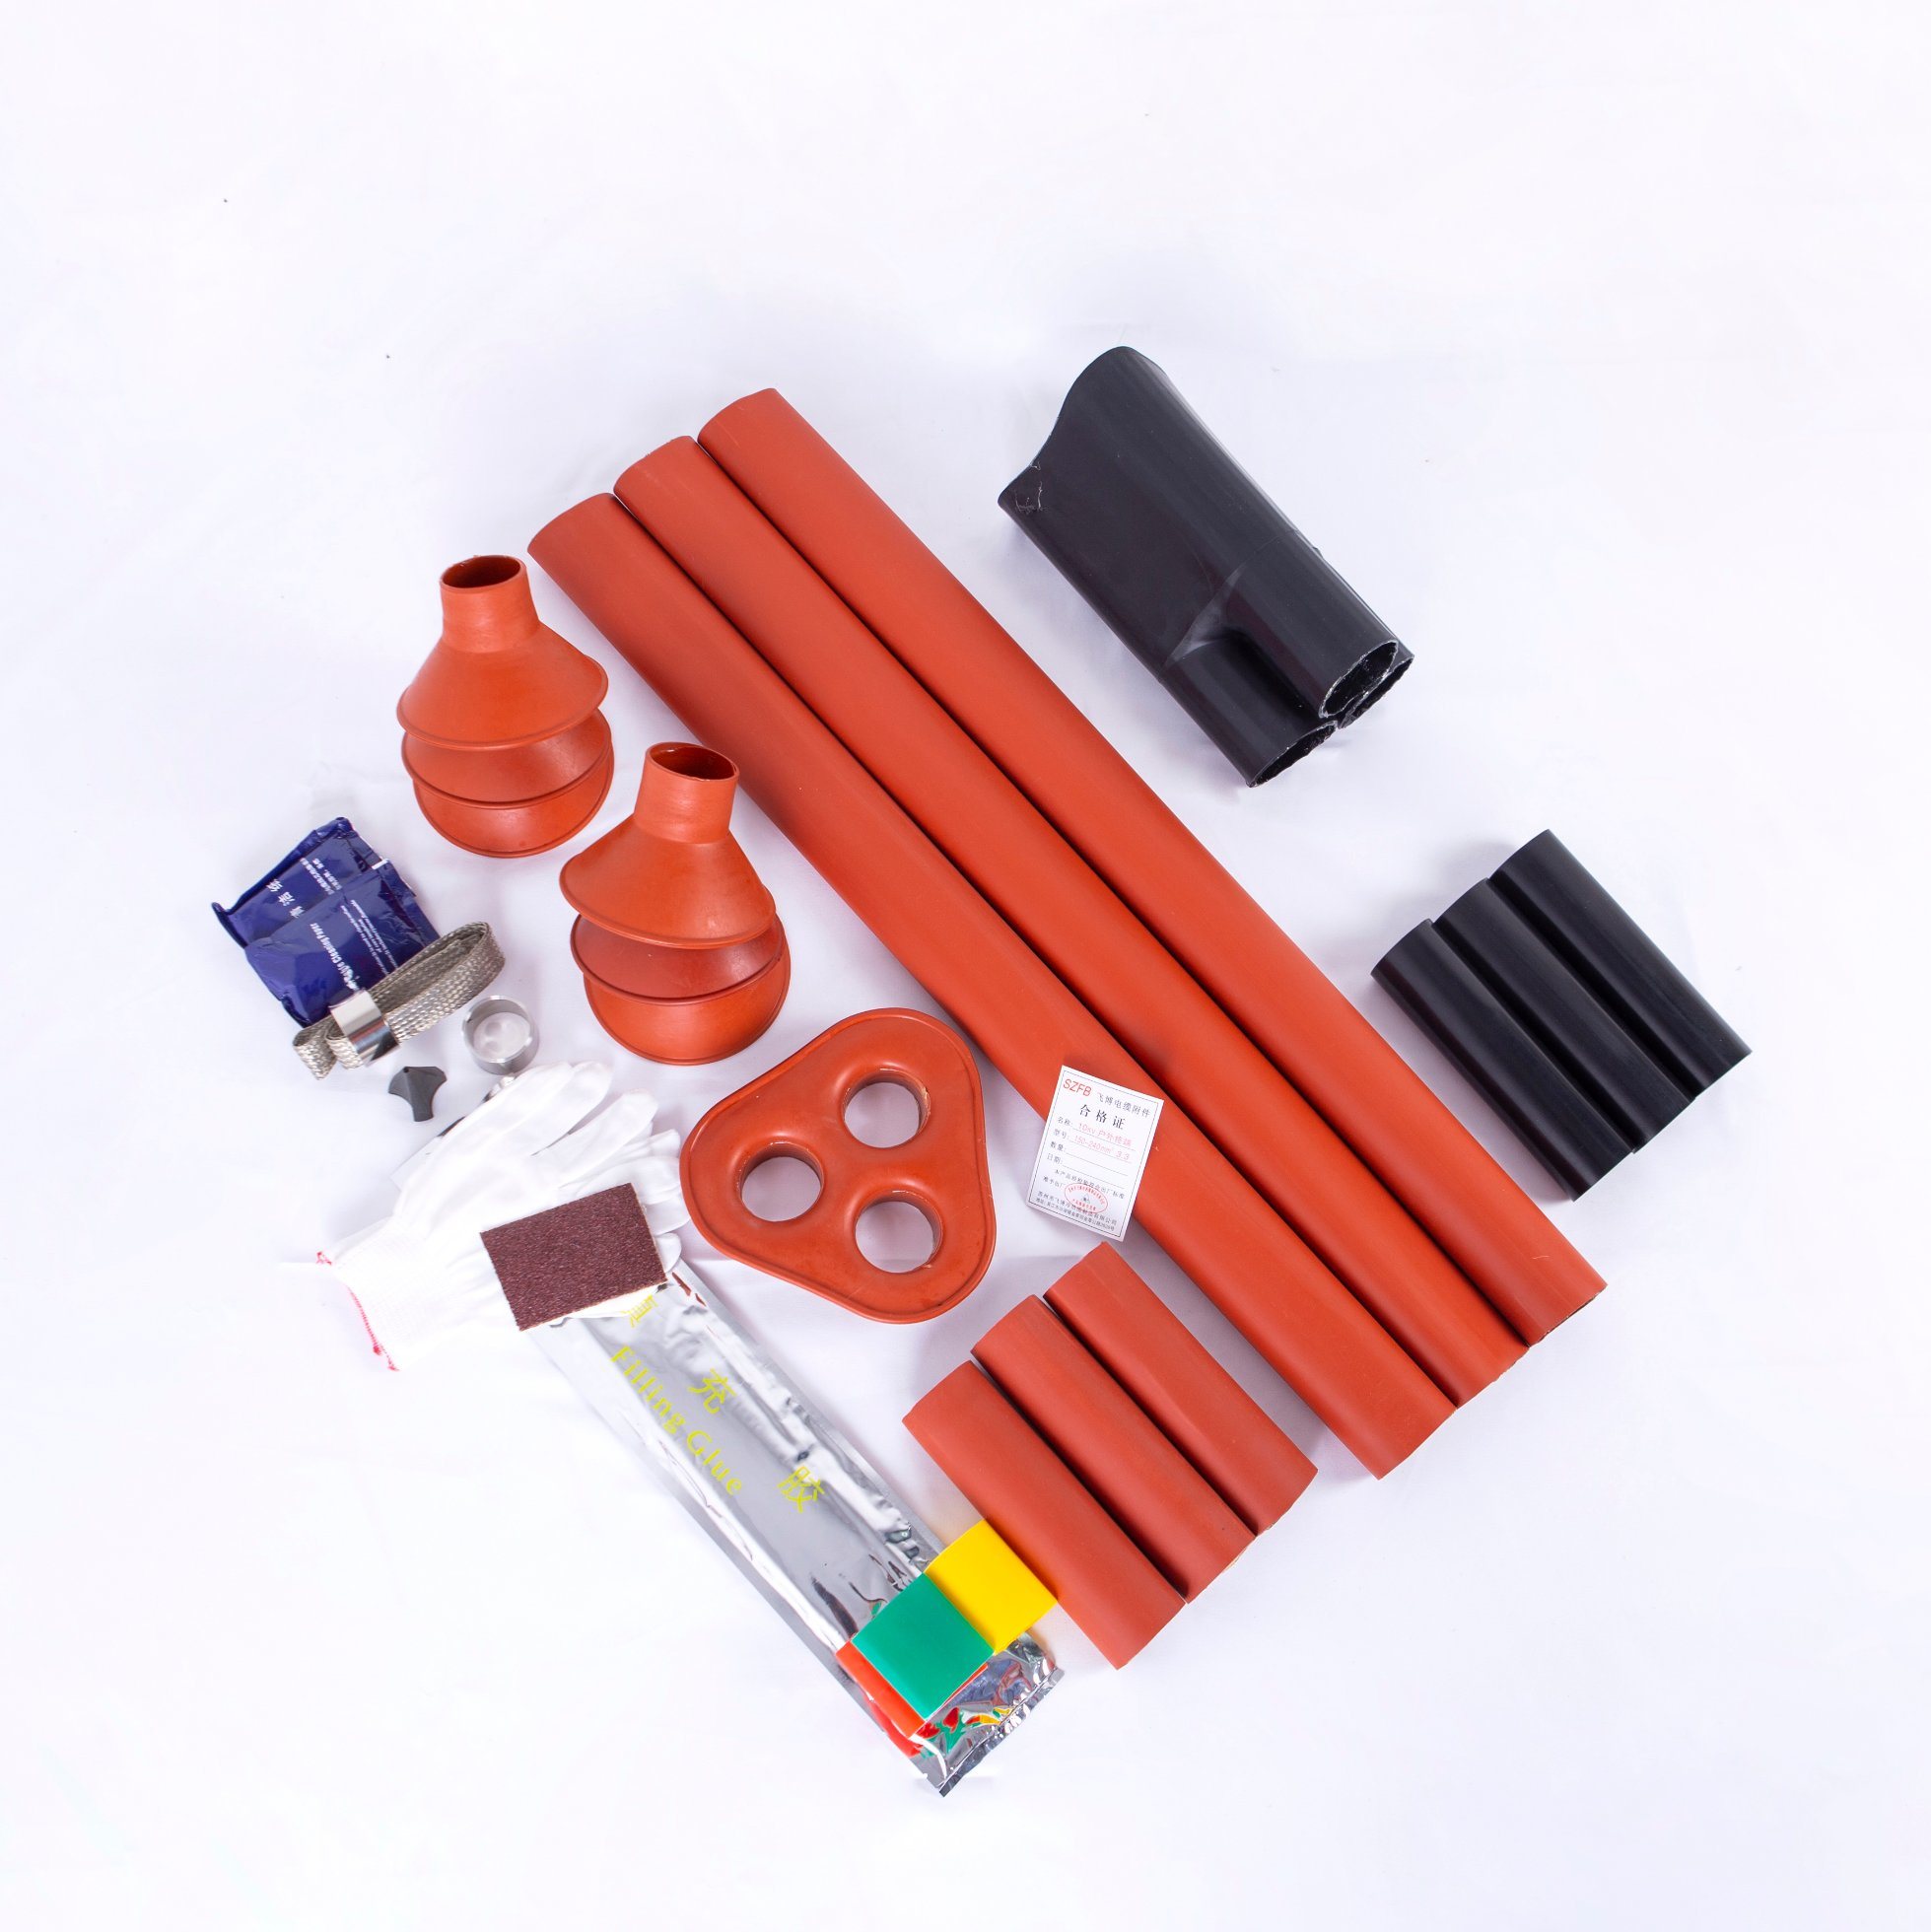 Suzhou Factory 10kv Heat Shrink Cable Accessories Termination Kits, Heat Shrink Straight Joint,